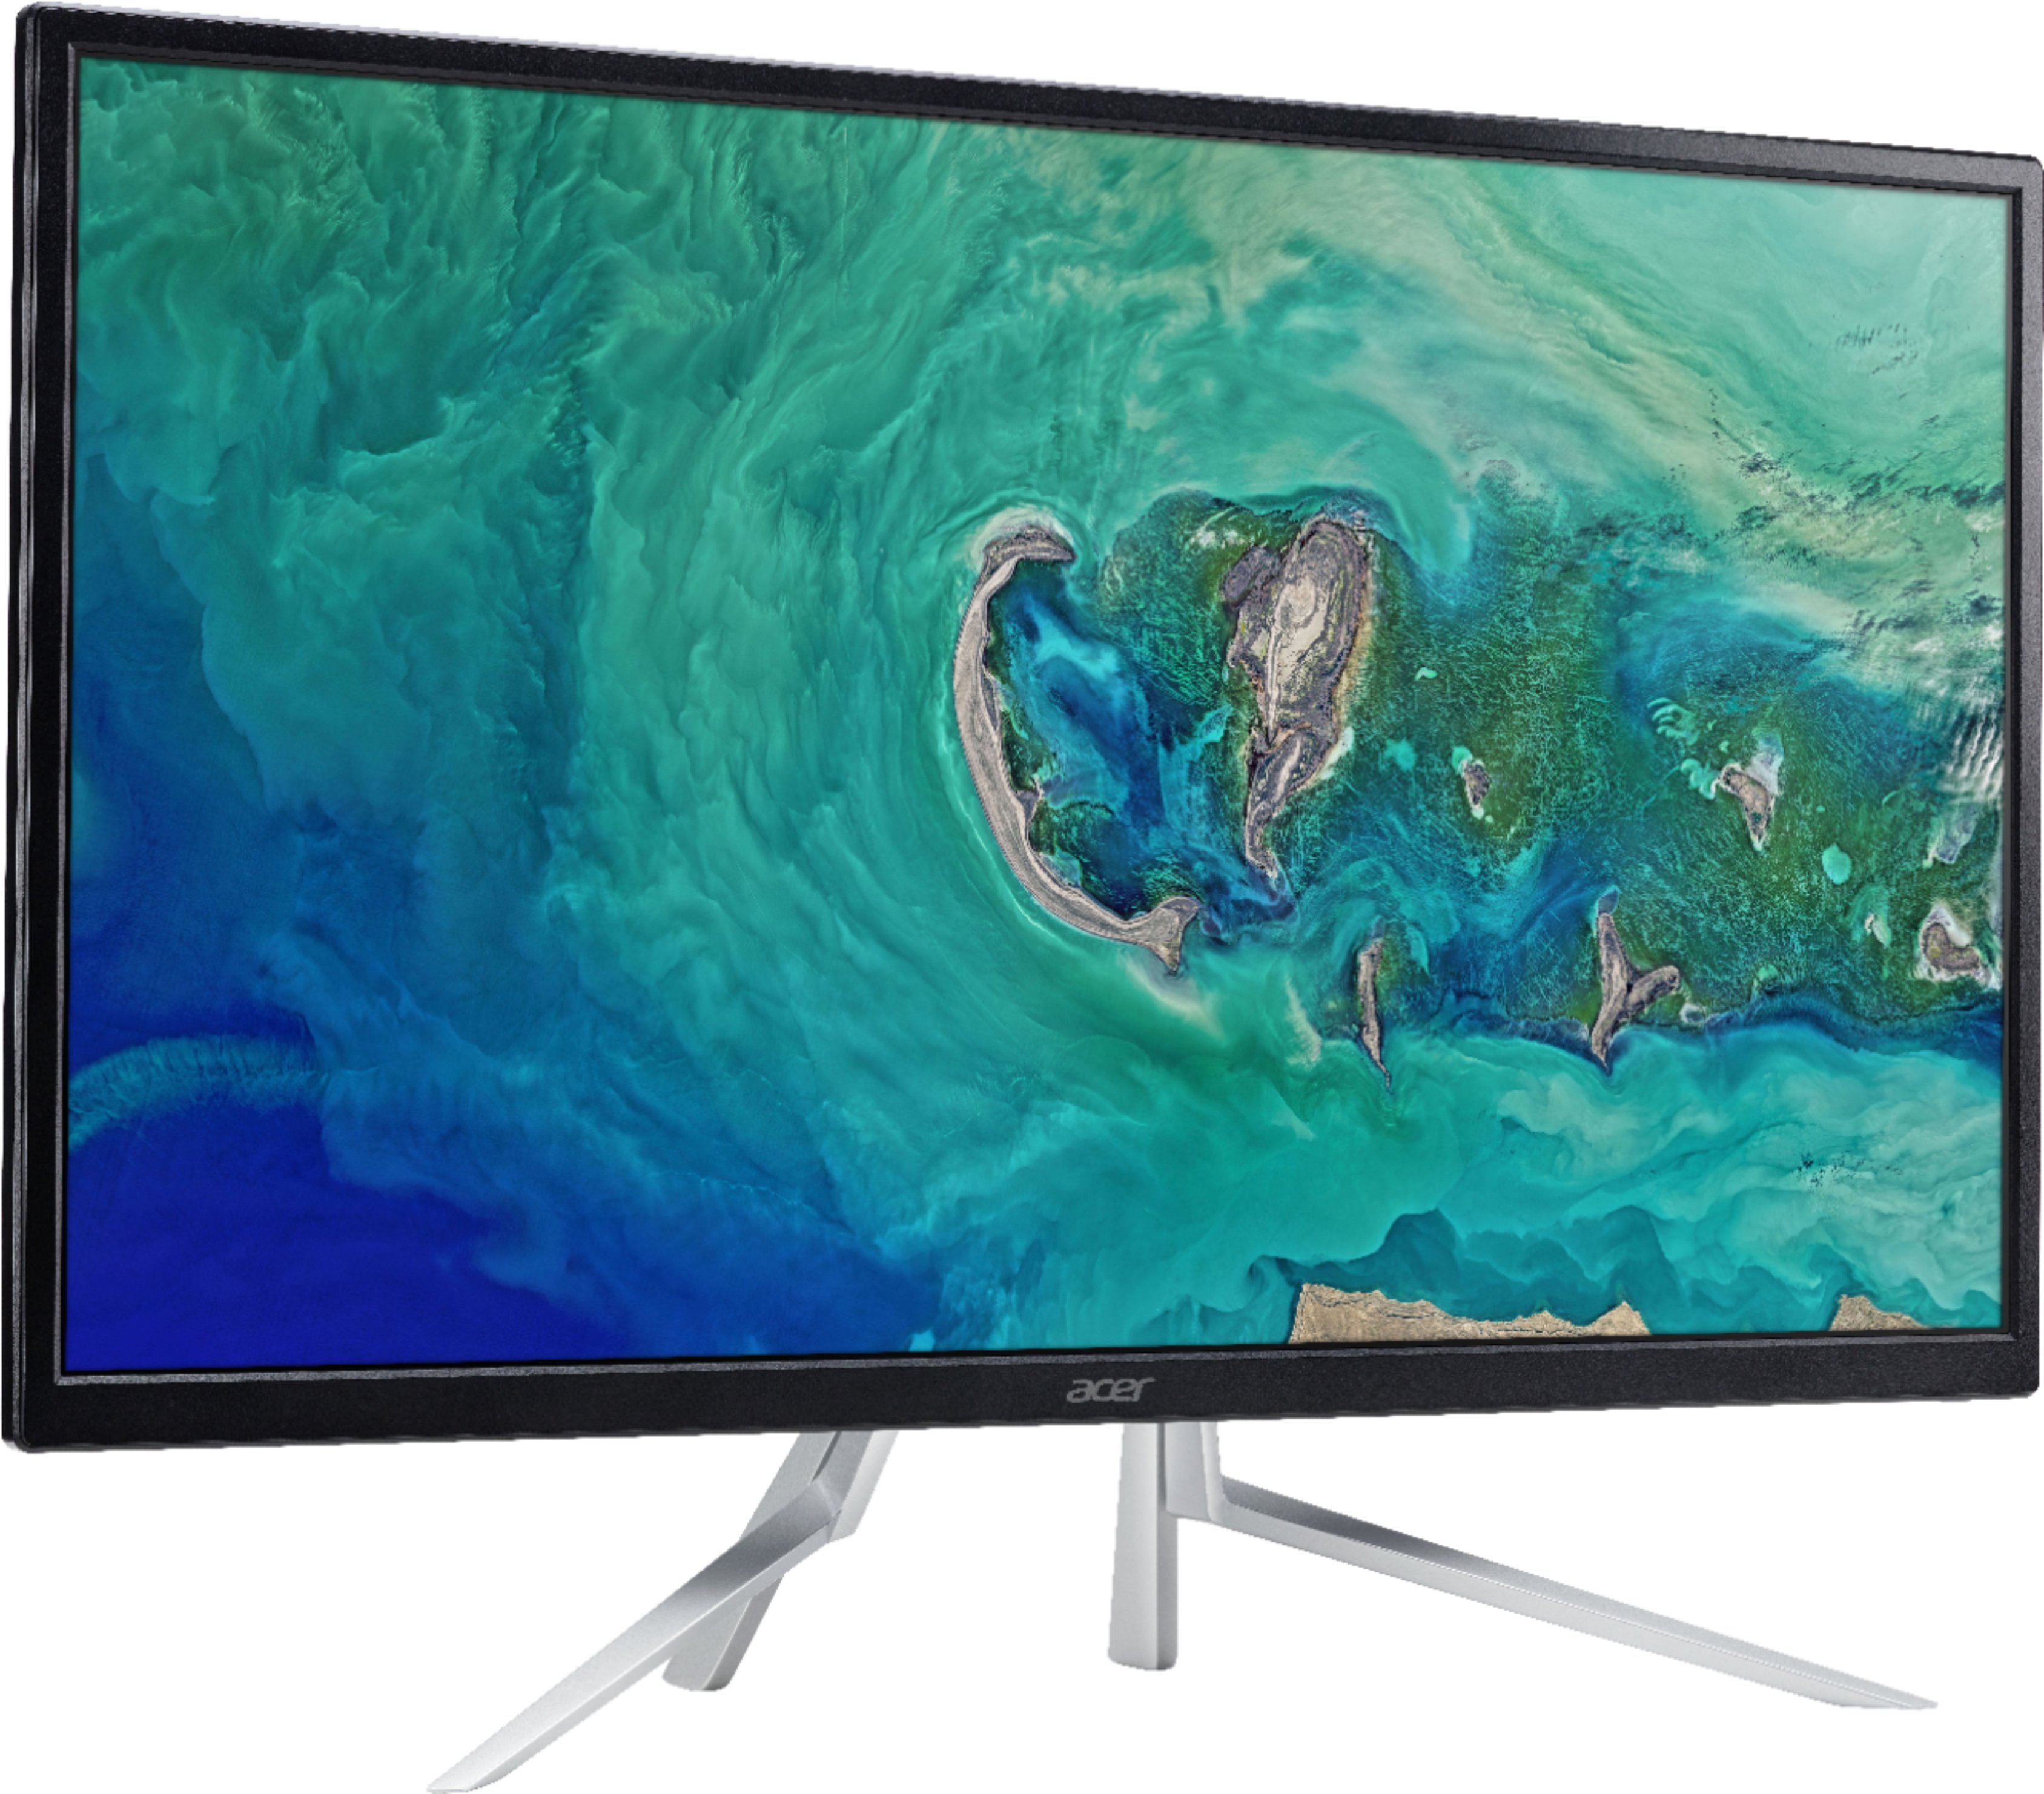 Angle View: Acer - ET322QU Abmiprx 31.5" WQ HD IPS Monitor with AMD FREESYNC Technology (Display Port, HDMI 1.4 Port & VGA Port)